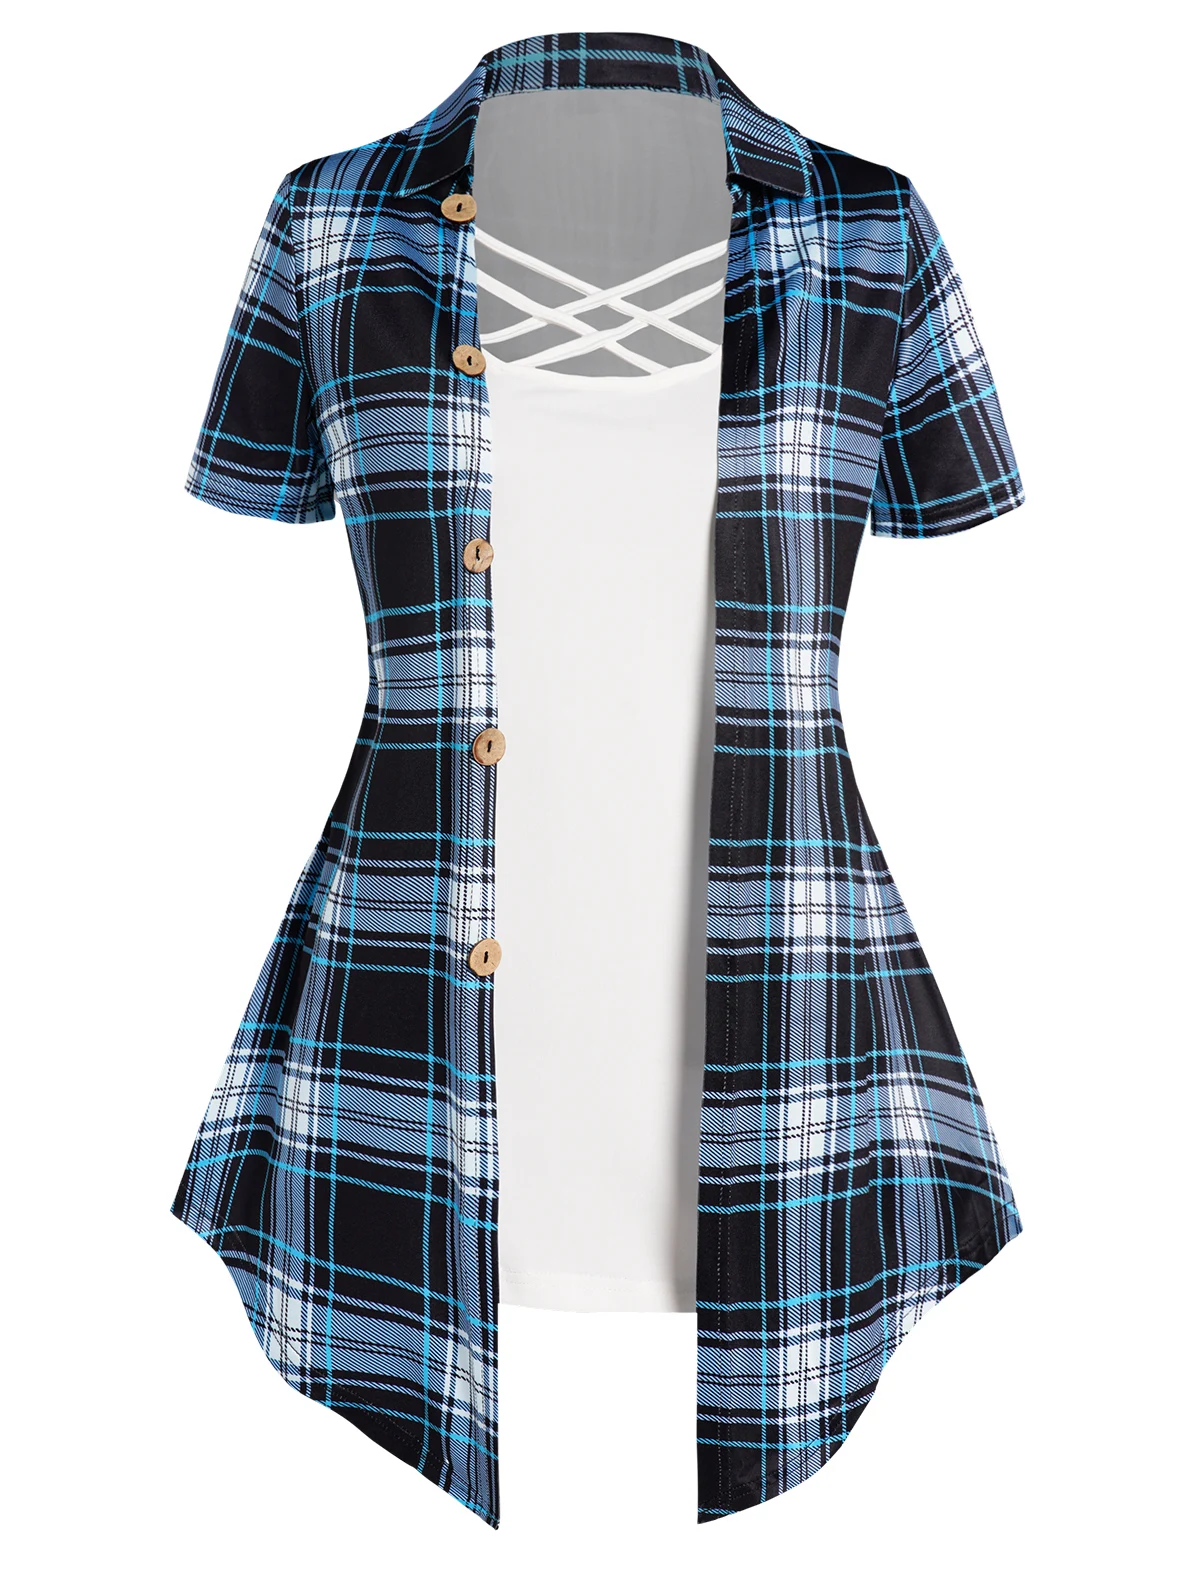 Vintage Plaid Print Crisscross Pointed Hem Faux Twinset T Shirt Women  Fashion Casual Retro Combo Twofer 2 In 1 Tees